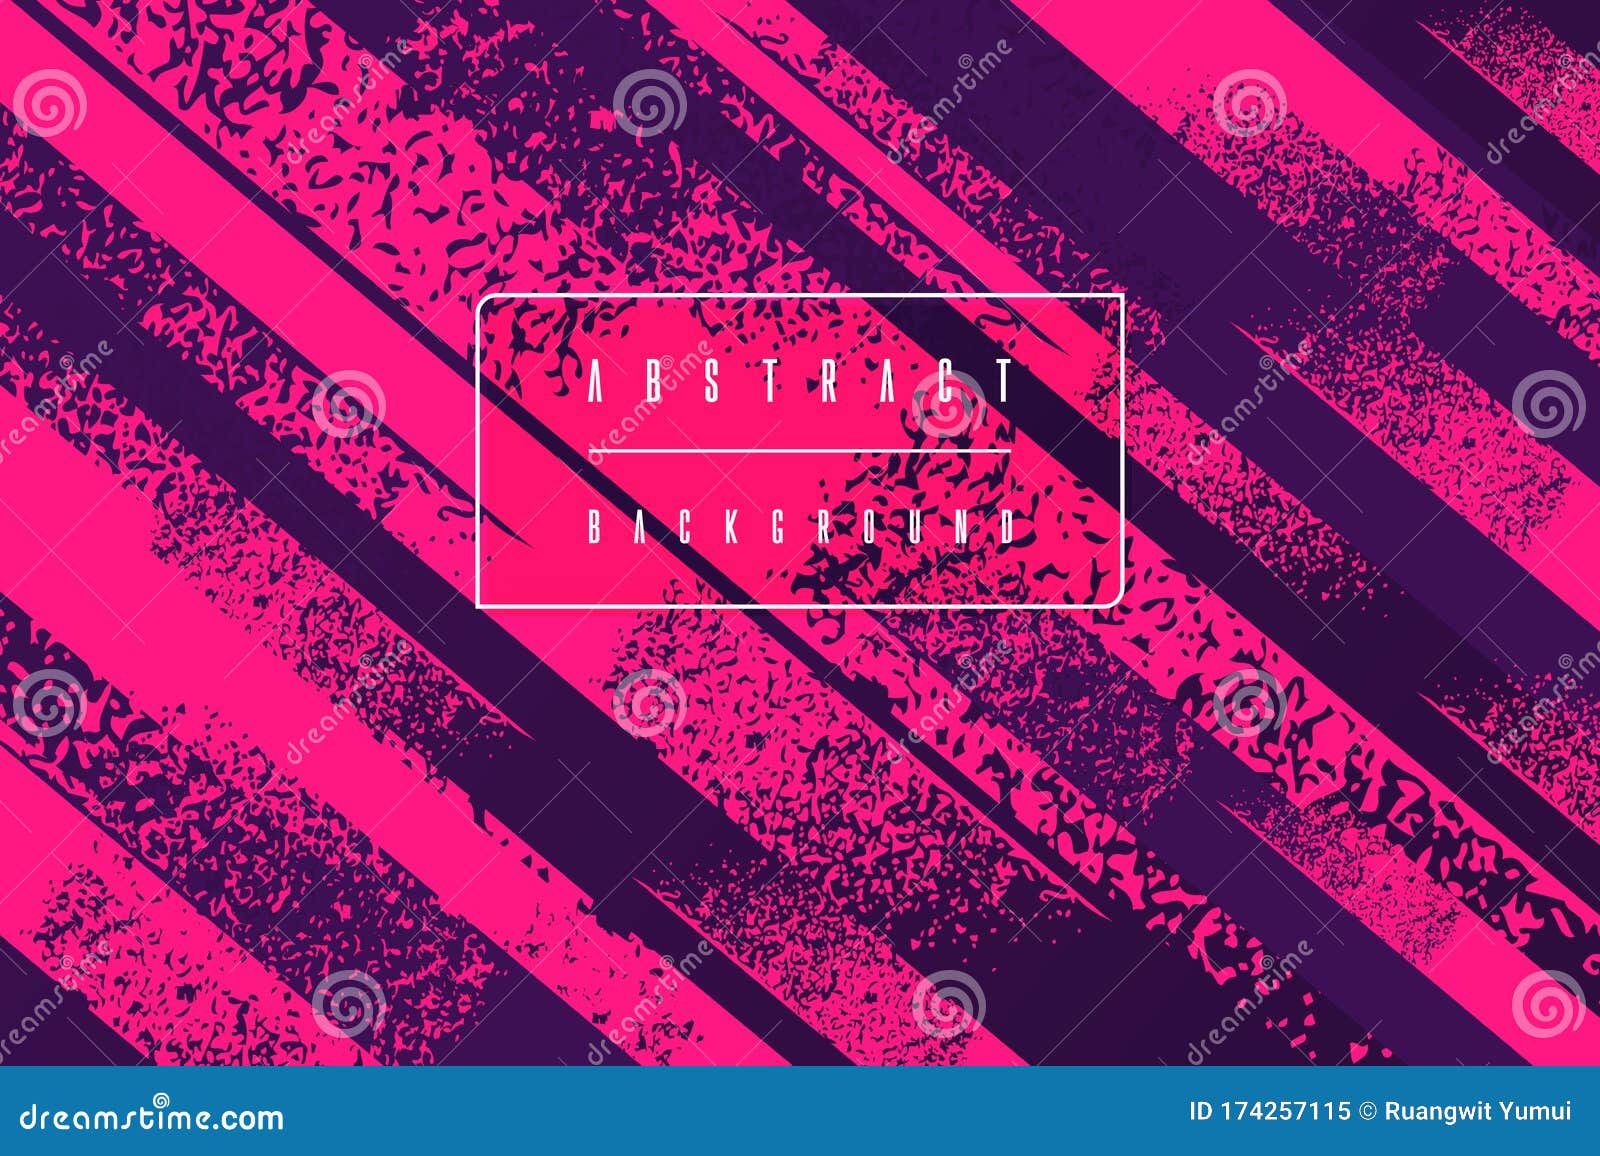 Abstract Background Template Design. Colorful Minimal Geometric   Colored Poster for Sports Background Vector Stock Vector - Illustration of  cloth, jersey: 174257115